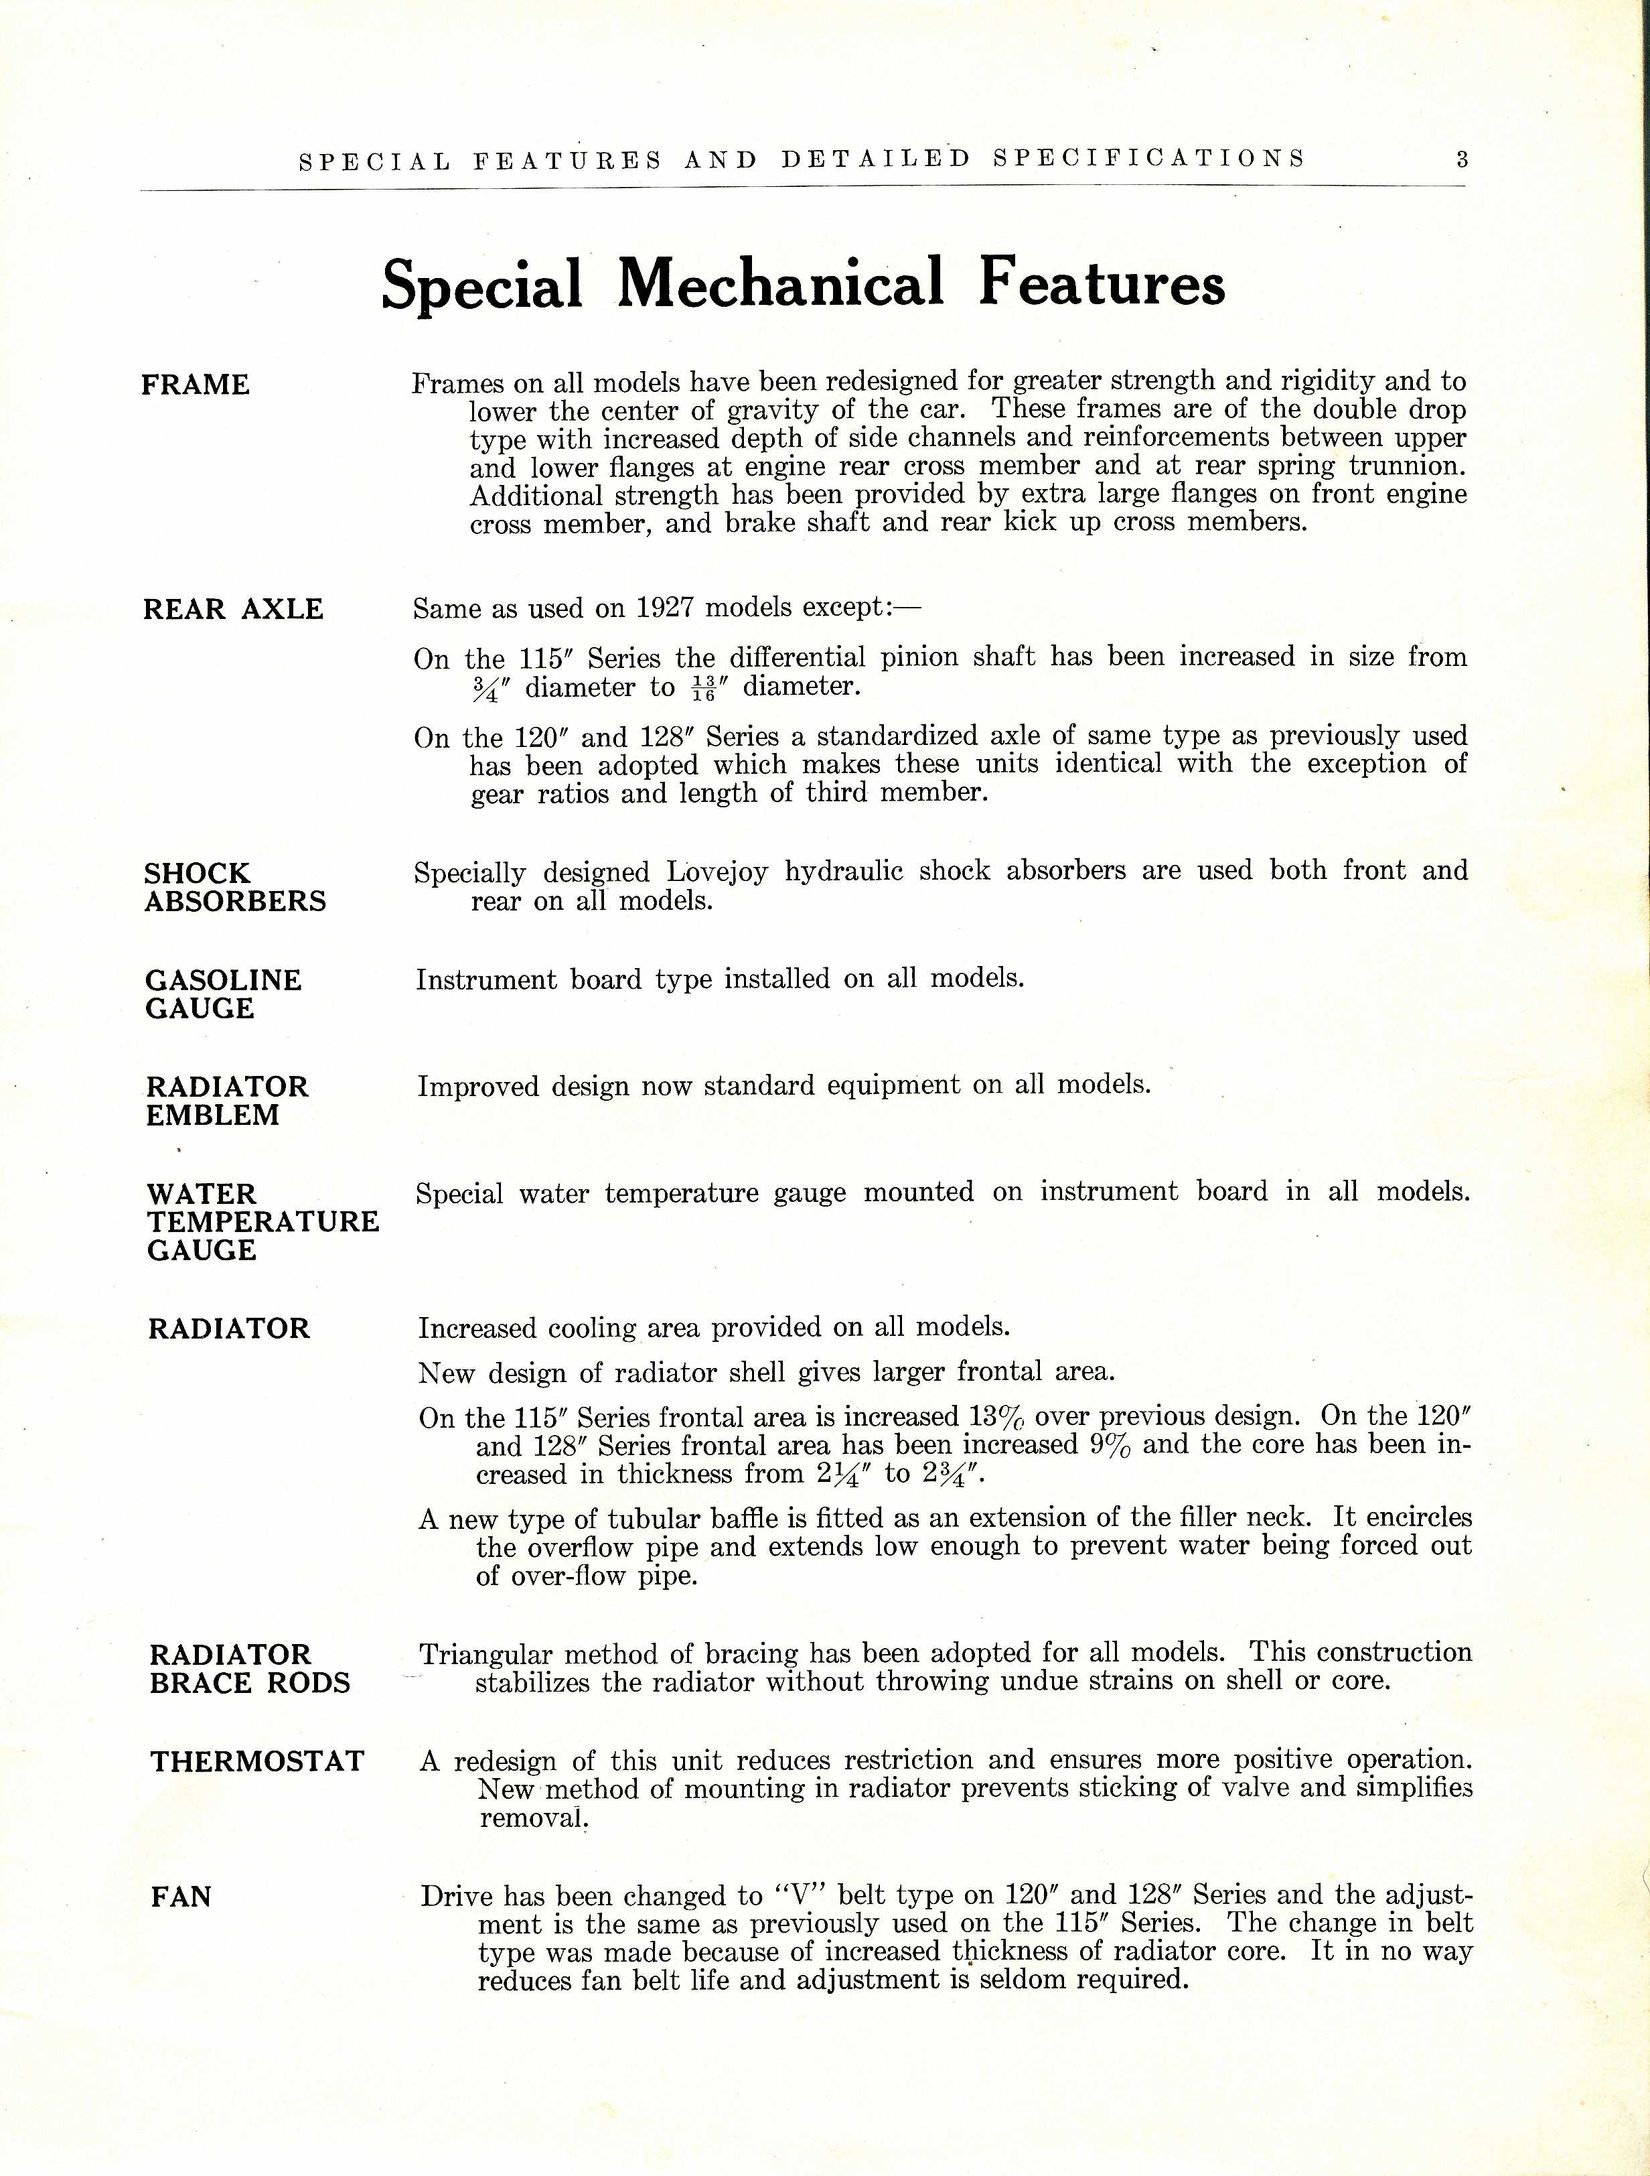 1928 Buick Special Features and  Specs-03